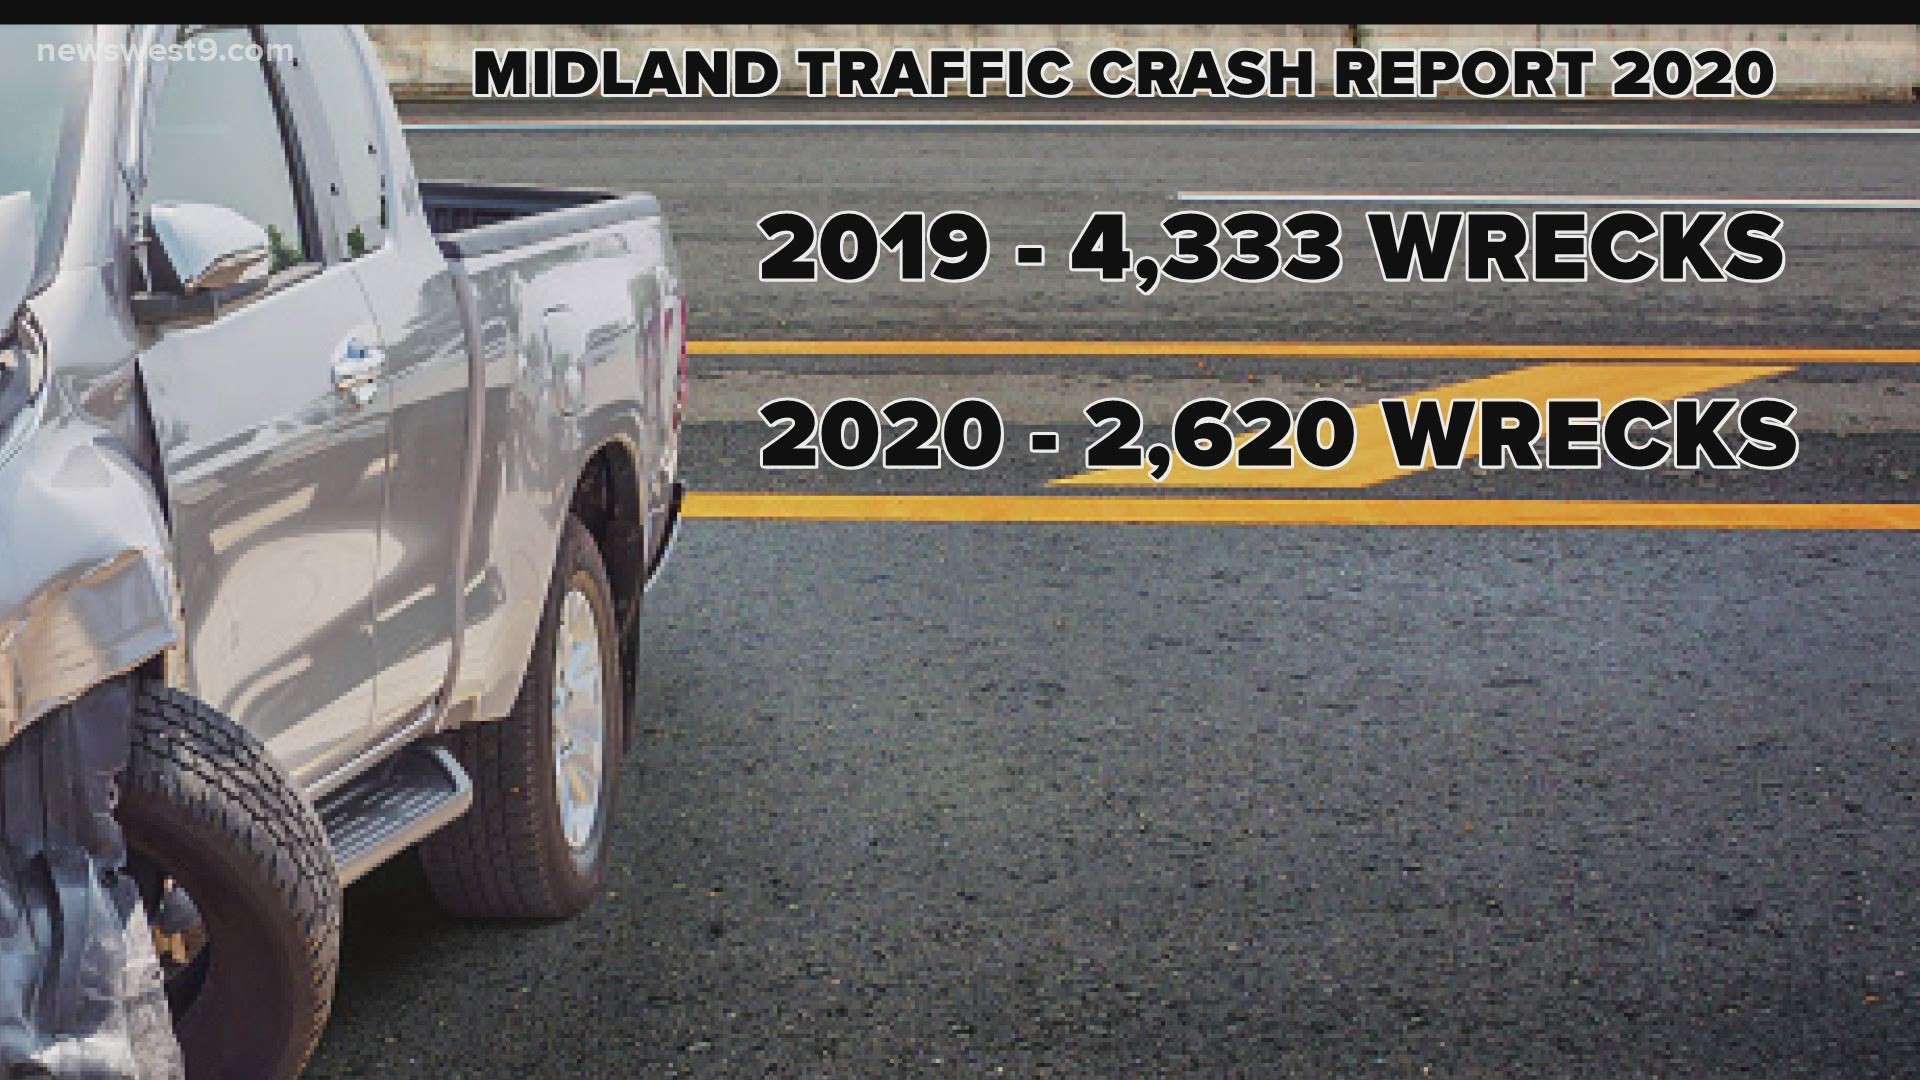 Crashes and fatalities were down this past year, a result of less people traveling due to the pandemic.